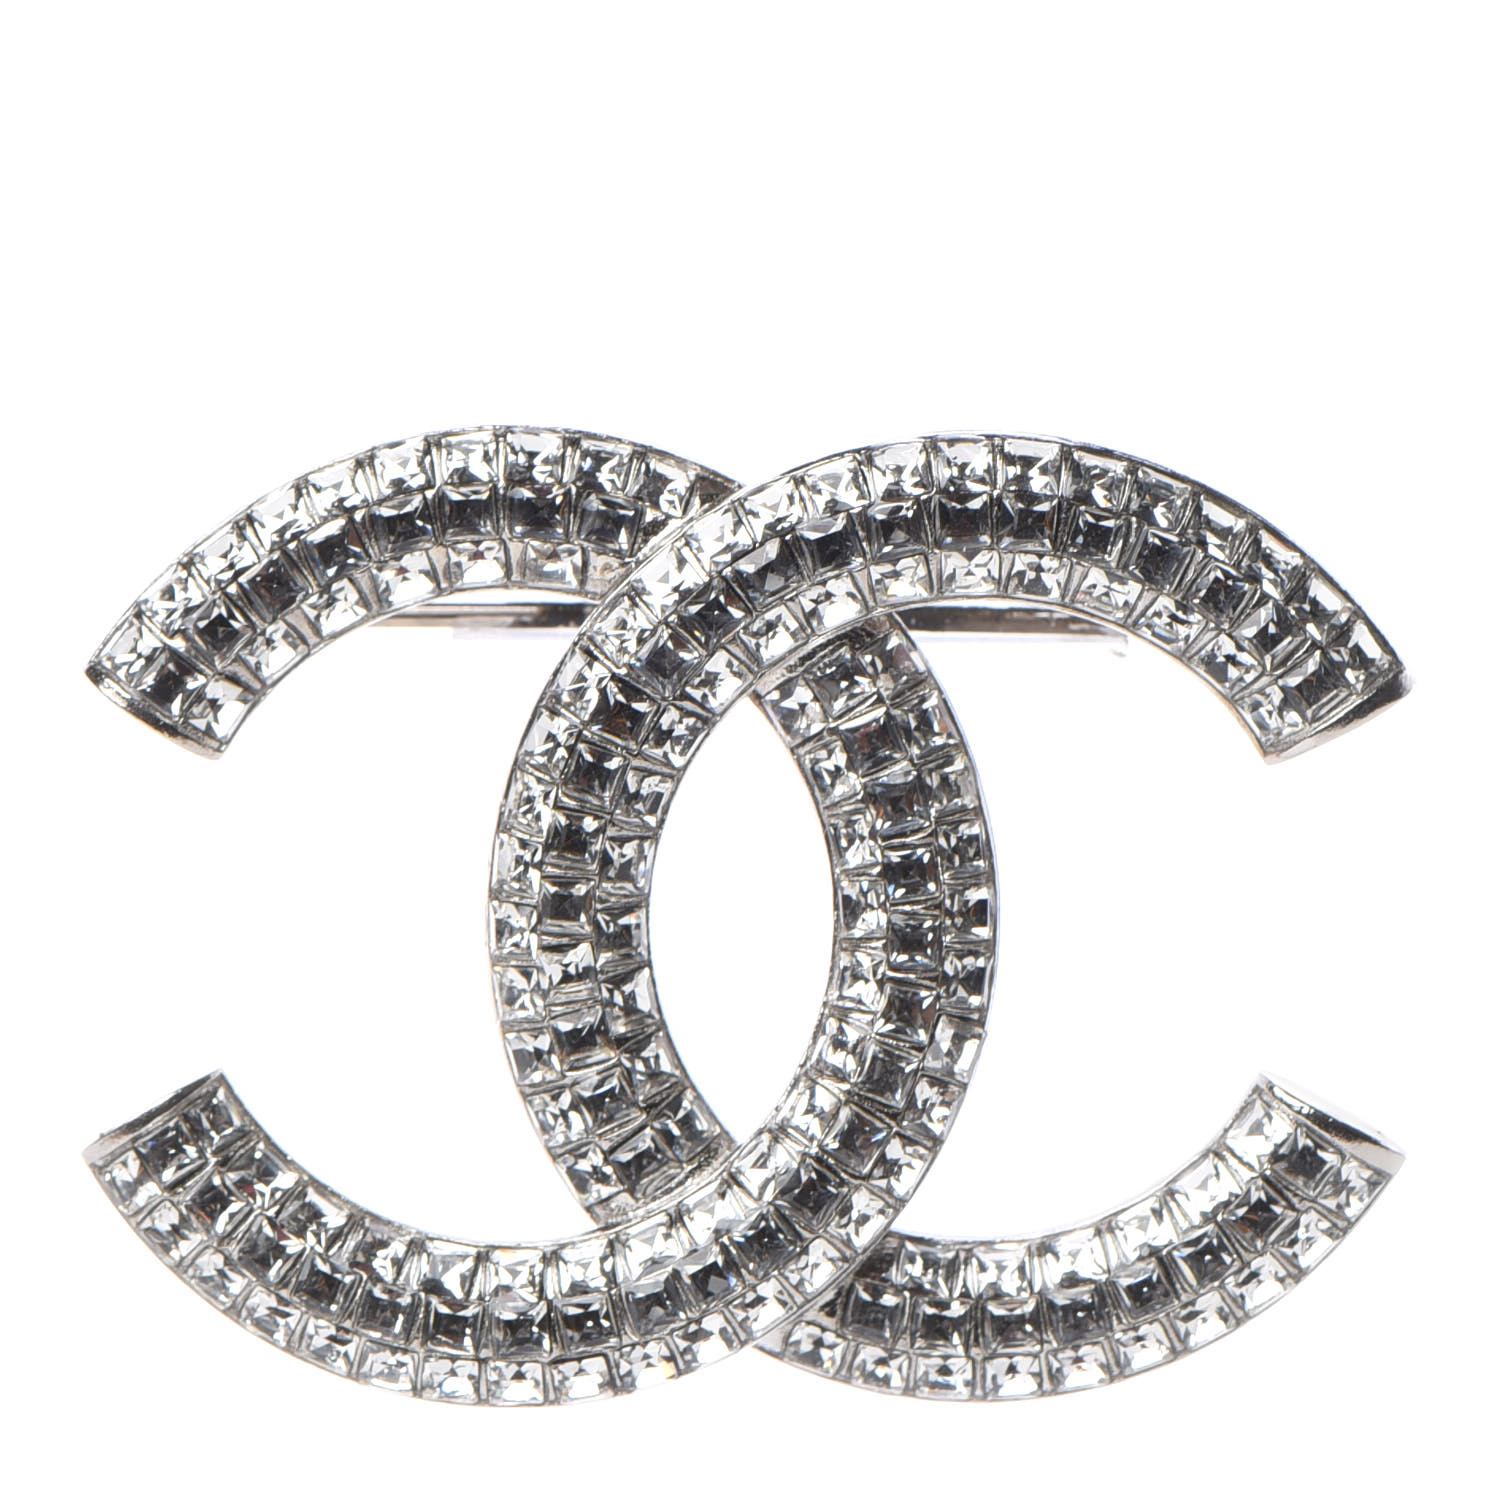 CHANEL Baguette Crystal CC Brooch Silver 378288